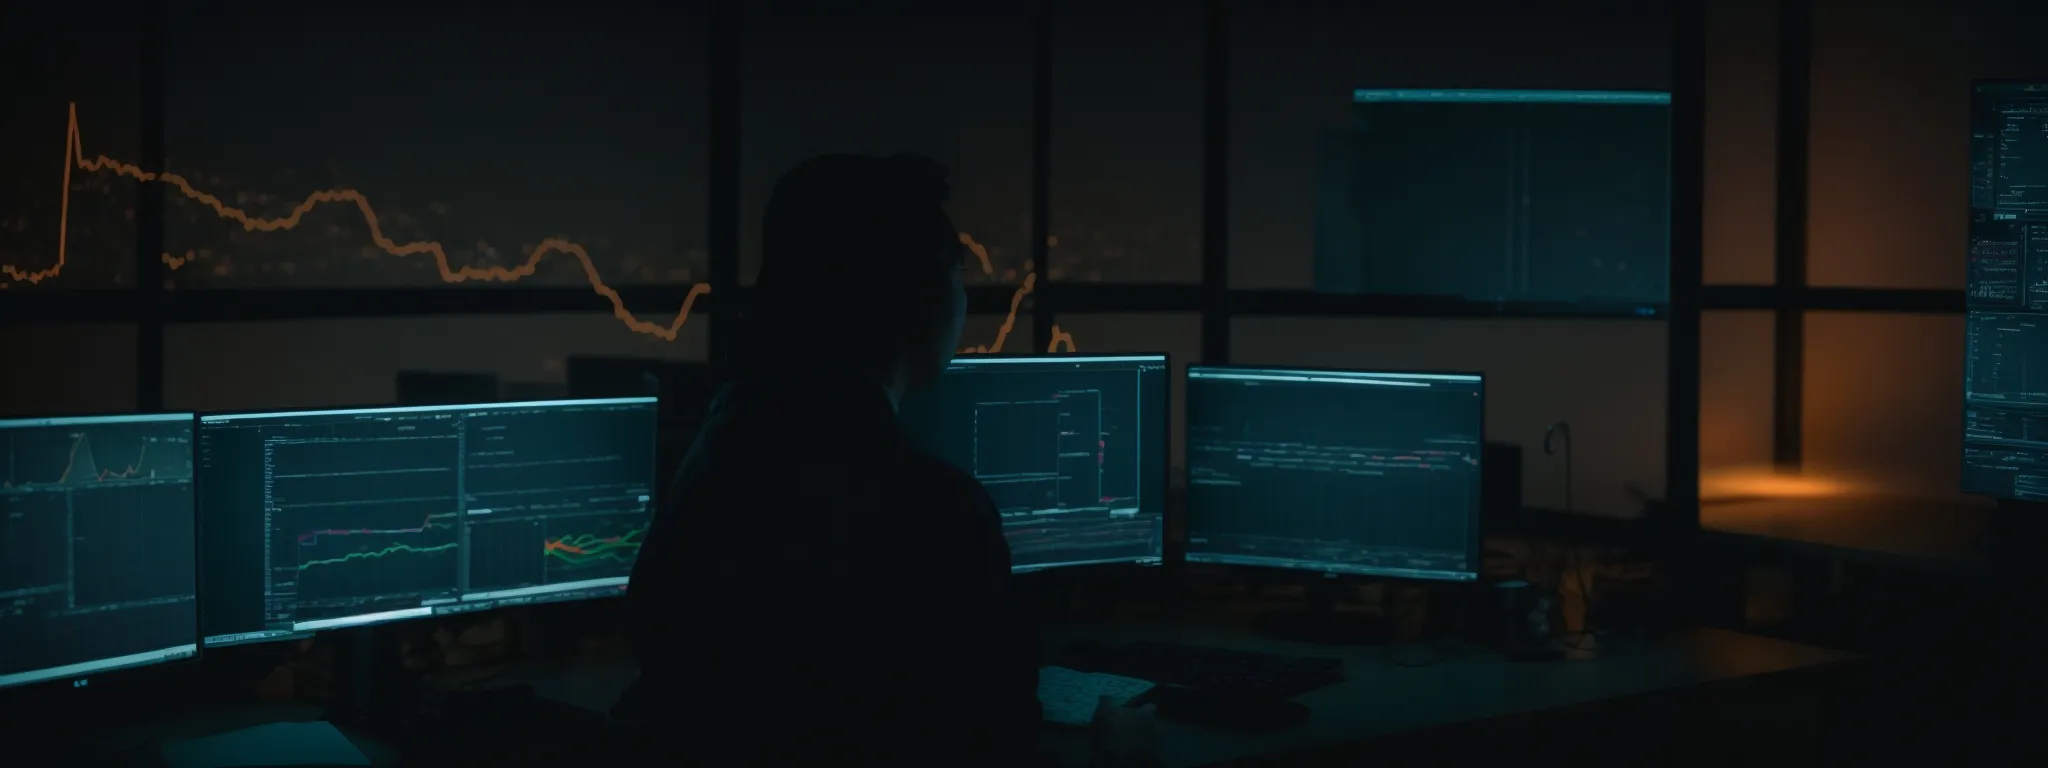 a digital marketer observes a luminous computer screen displaying a structured data graph amidst a dark office setting.